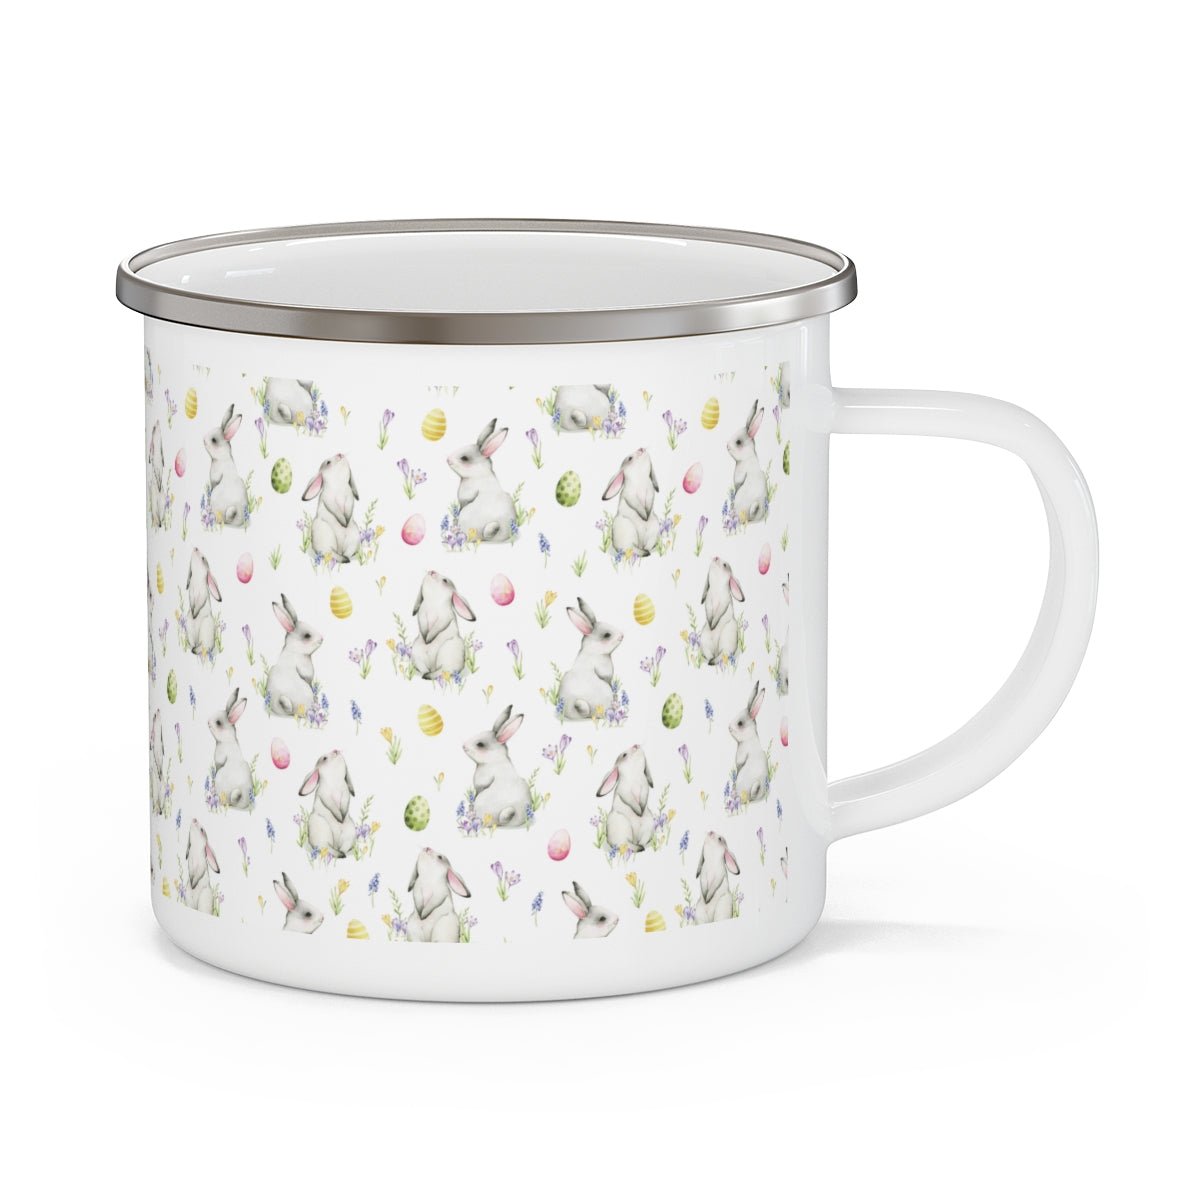 Cottontail Bunnies and Eggs Stainless Steel Camping Mug - Puffin Lime